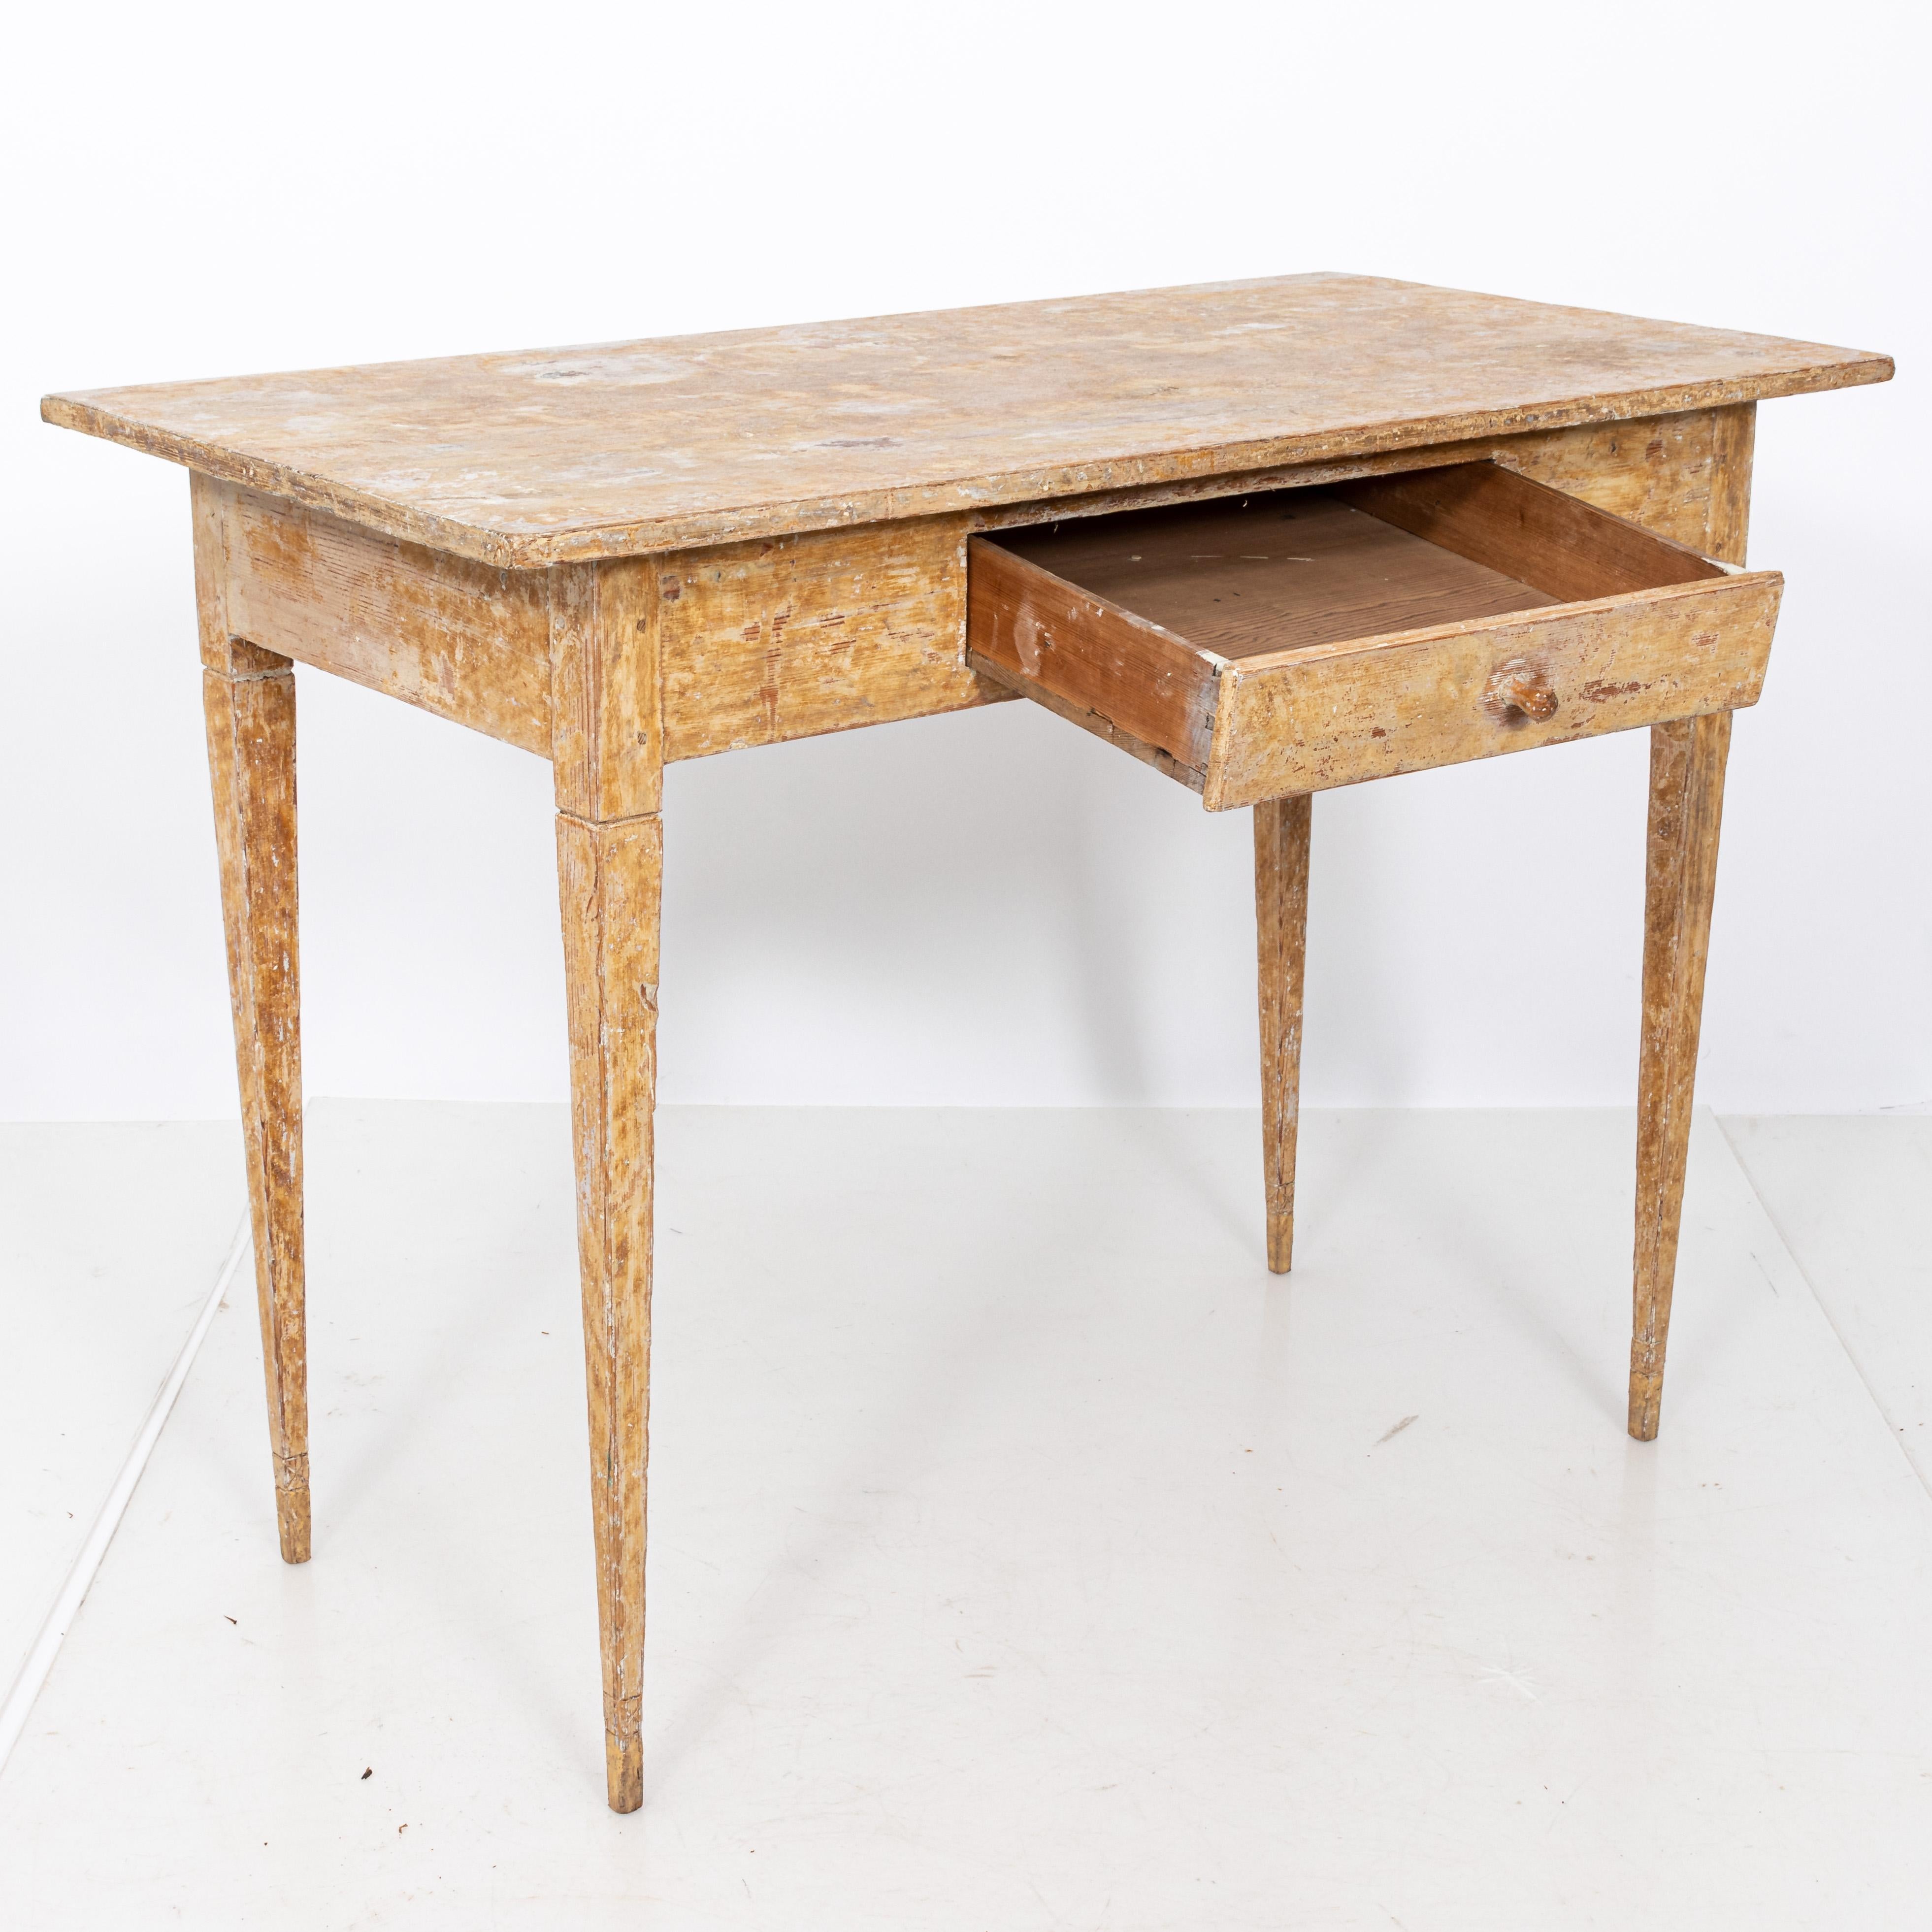 Late 18th Century Gustavian Writing Desk with a single drawer with original pull. Historic paint dry scraped to original layer.

